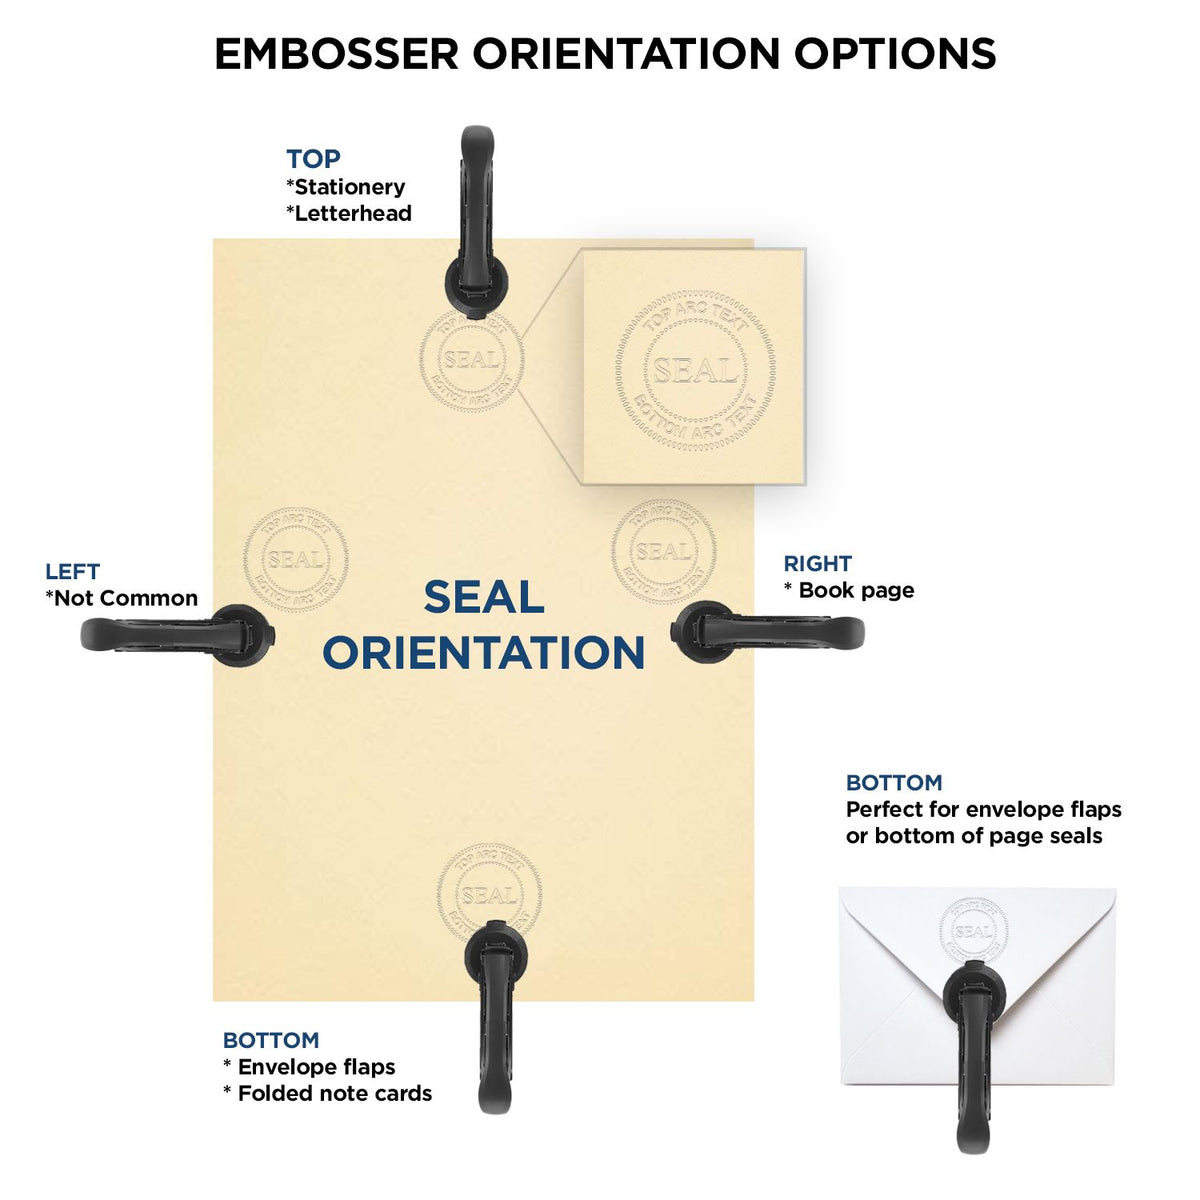 An infographic for the Heavy Duty Cast Iron Louisiana Architect Embosser showing embosser orientation, this is showing examples of a top, bottom, right and left insert.